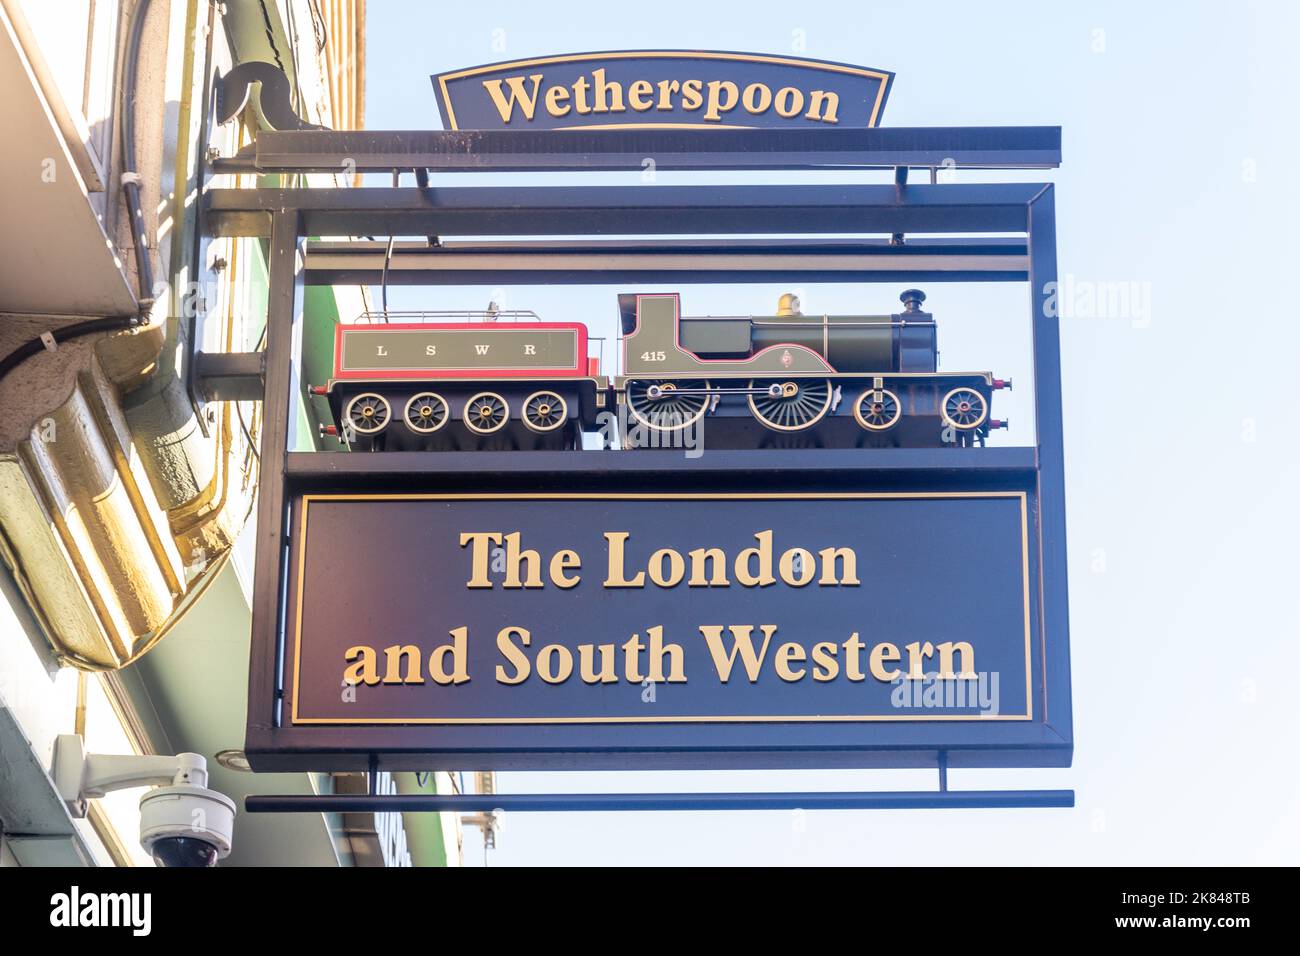 The London and South Western Pub sign, Lavender Hill, Clapham Junction, Battersea, Borough of Wandsworth, Greater London, England, United Kingdom Stock Photo